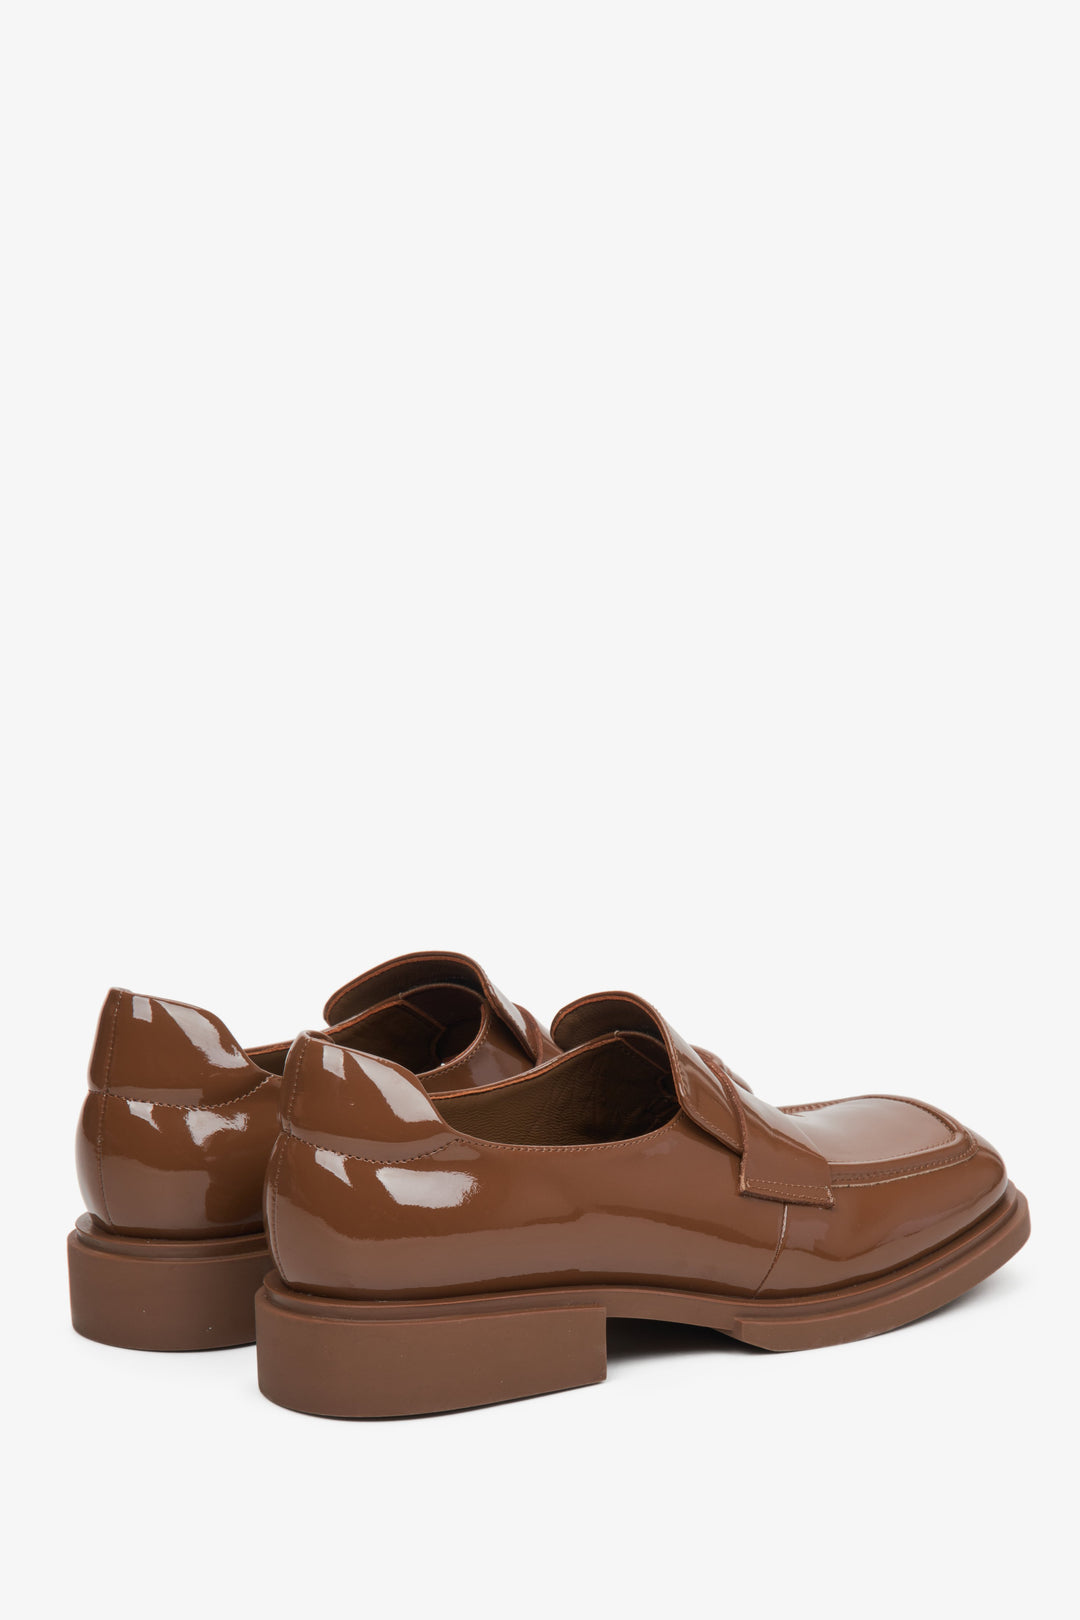 Women's brown, patent leather moccasins with a square toe - side view and heel.